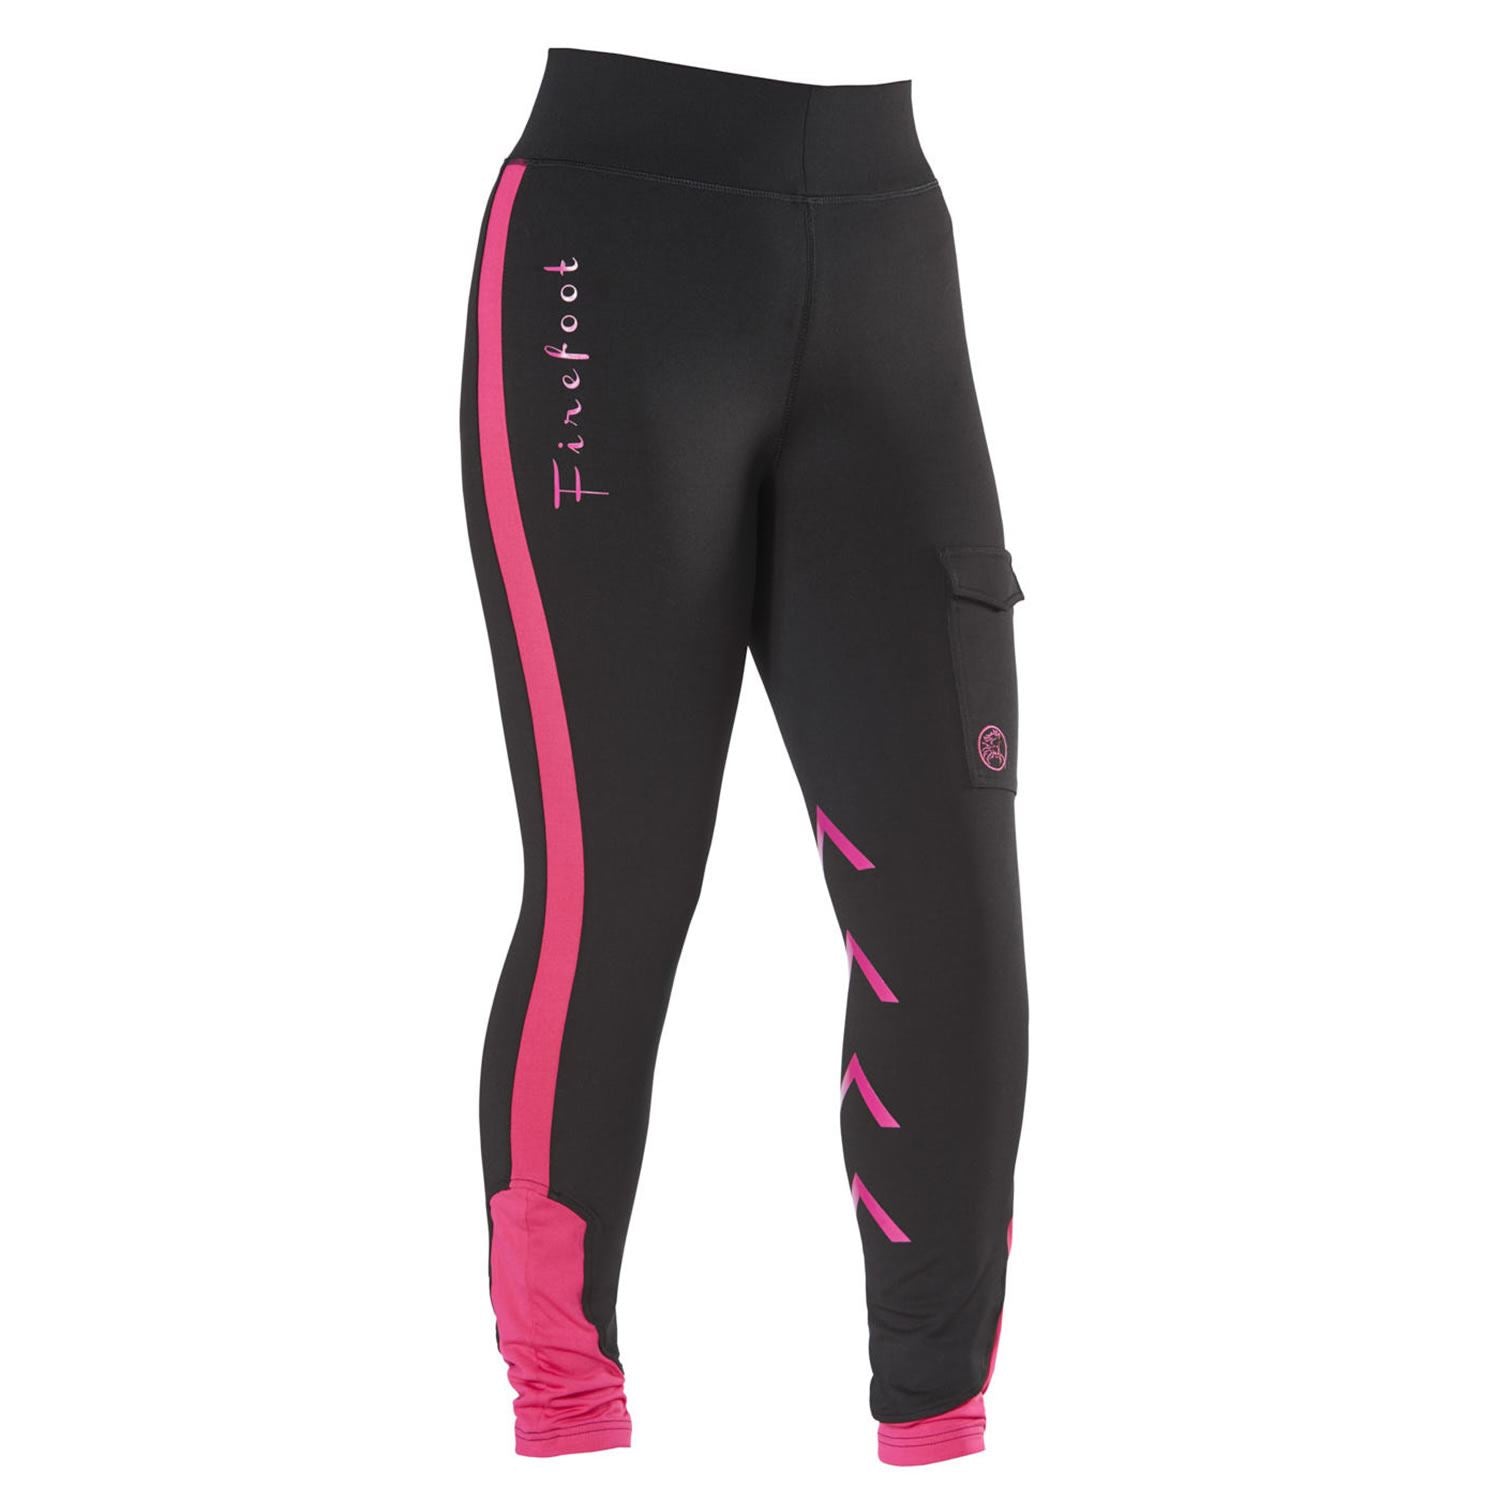 Firefoot Ripon Reflective Breeches Ladies - Just Horse Riders